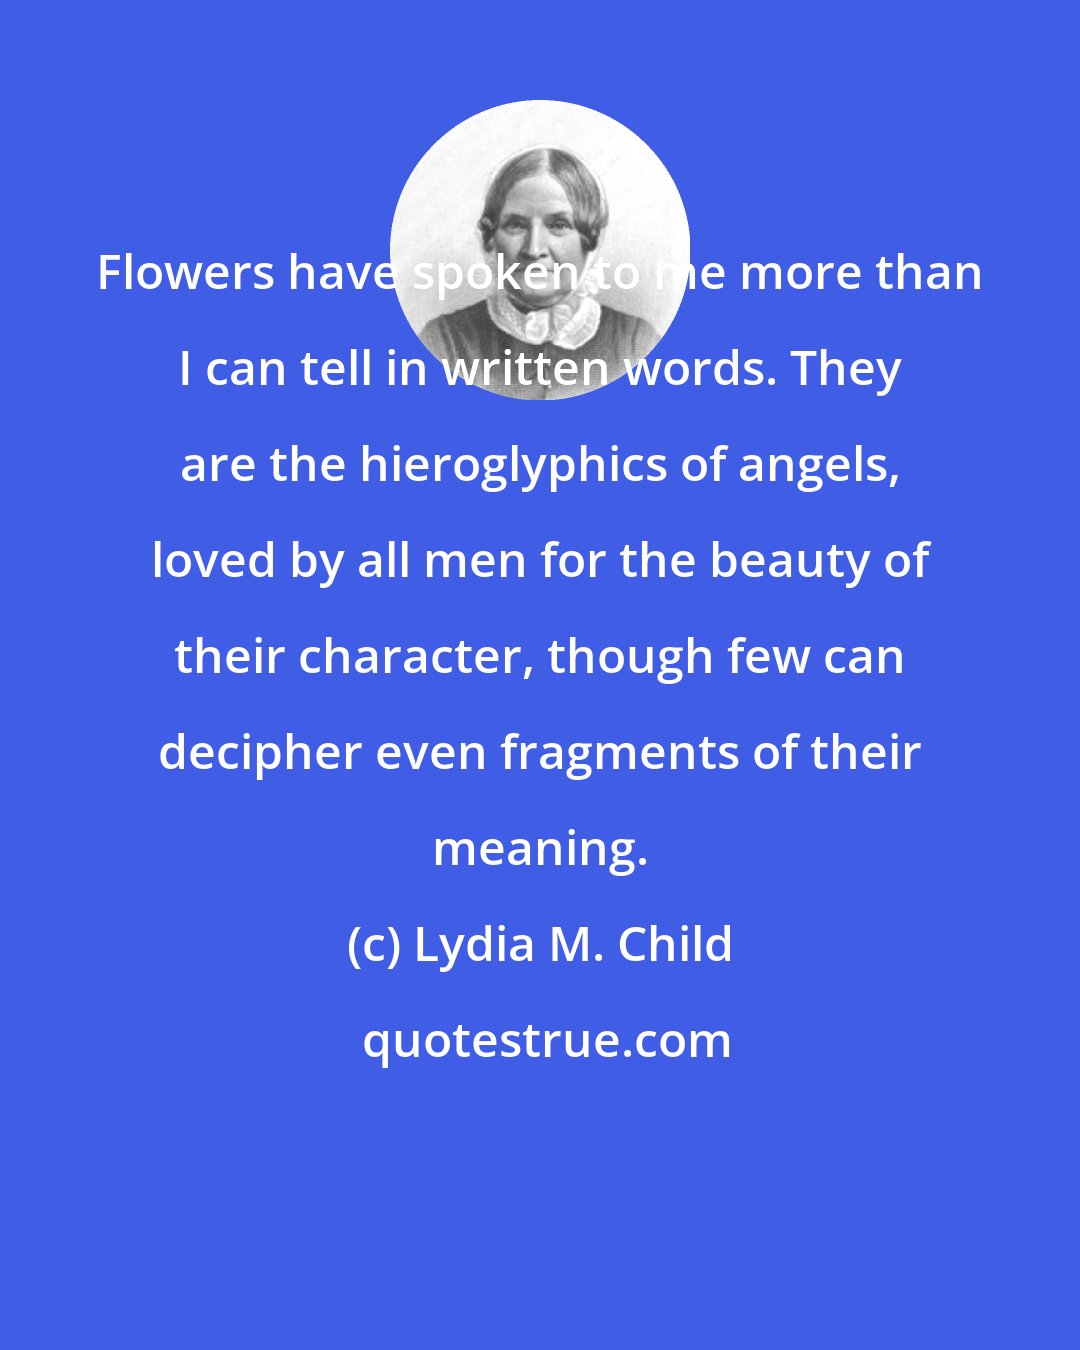 Lydia M. Child: Flowers have spoken to me more than I can tell in written words. They are the hieroglyphics of angels, loved by all men for the beauty of their character, though few can decipher even fragments of their meaning.